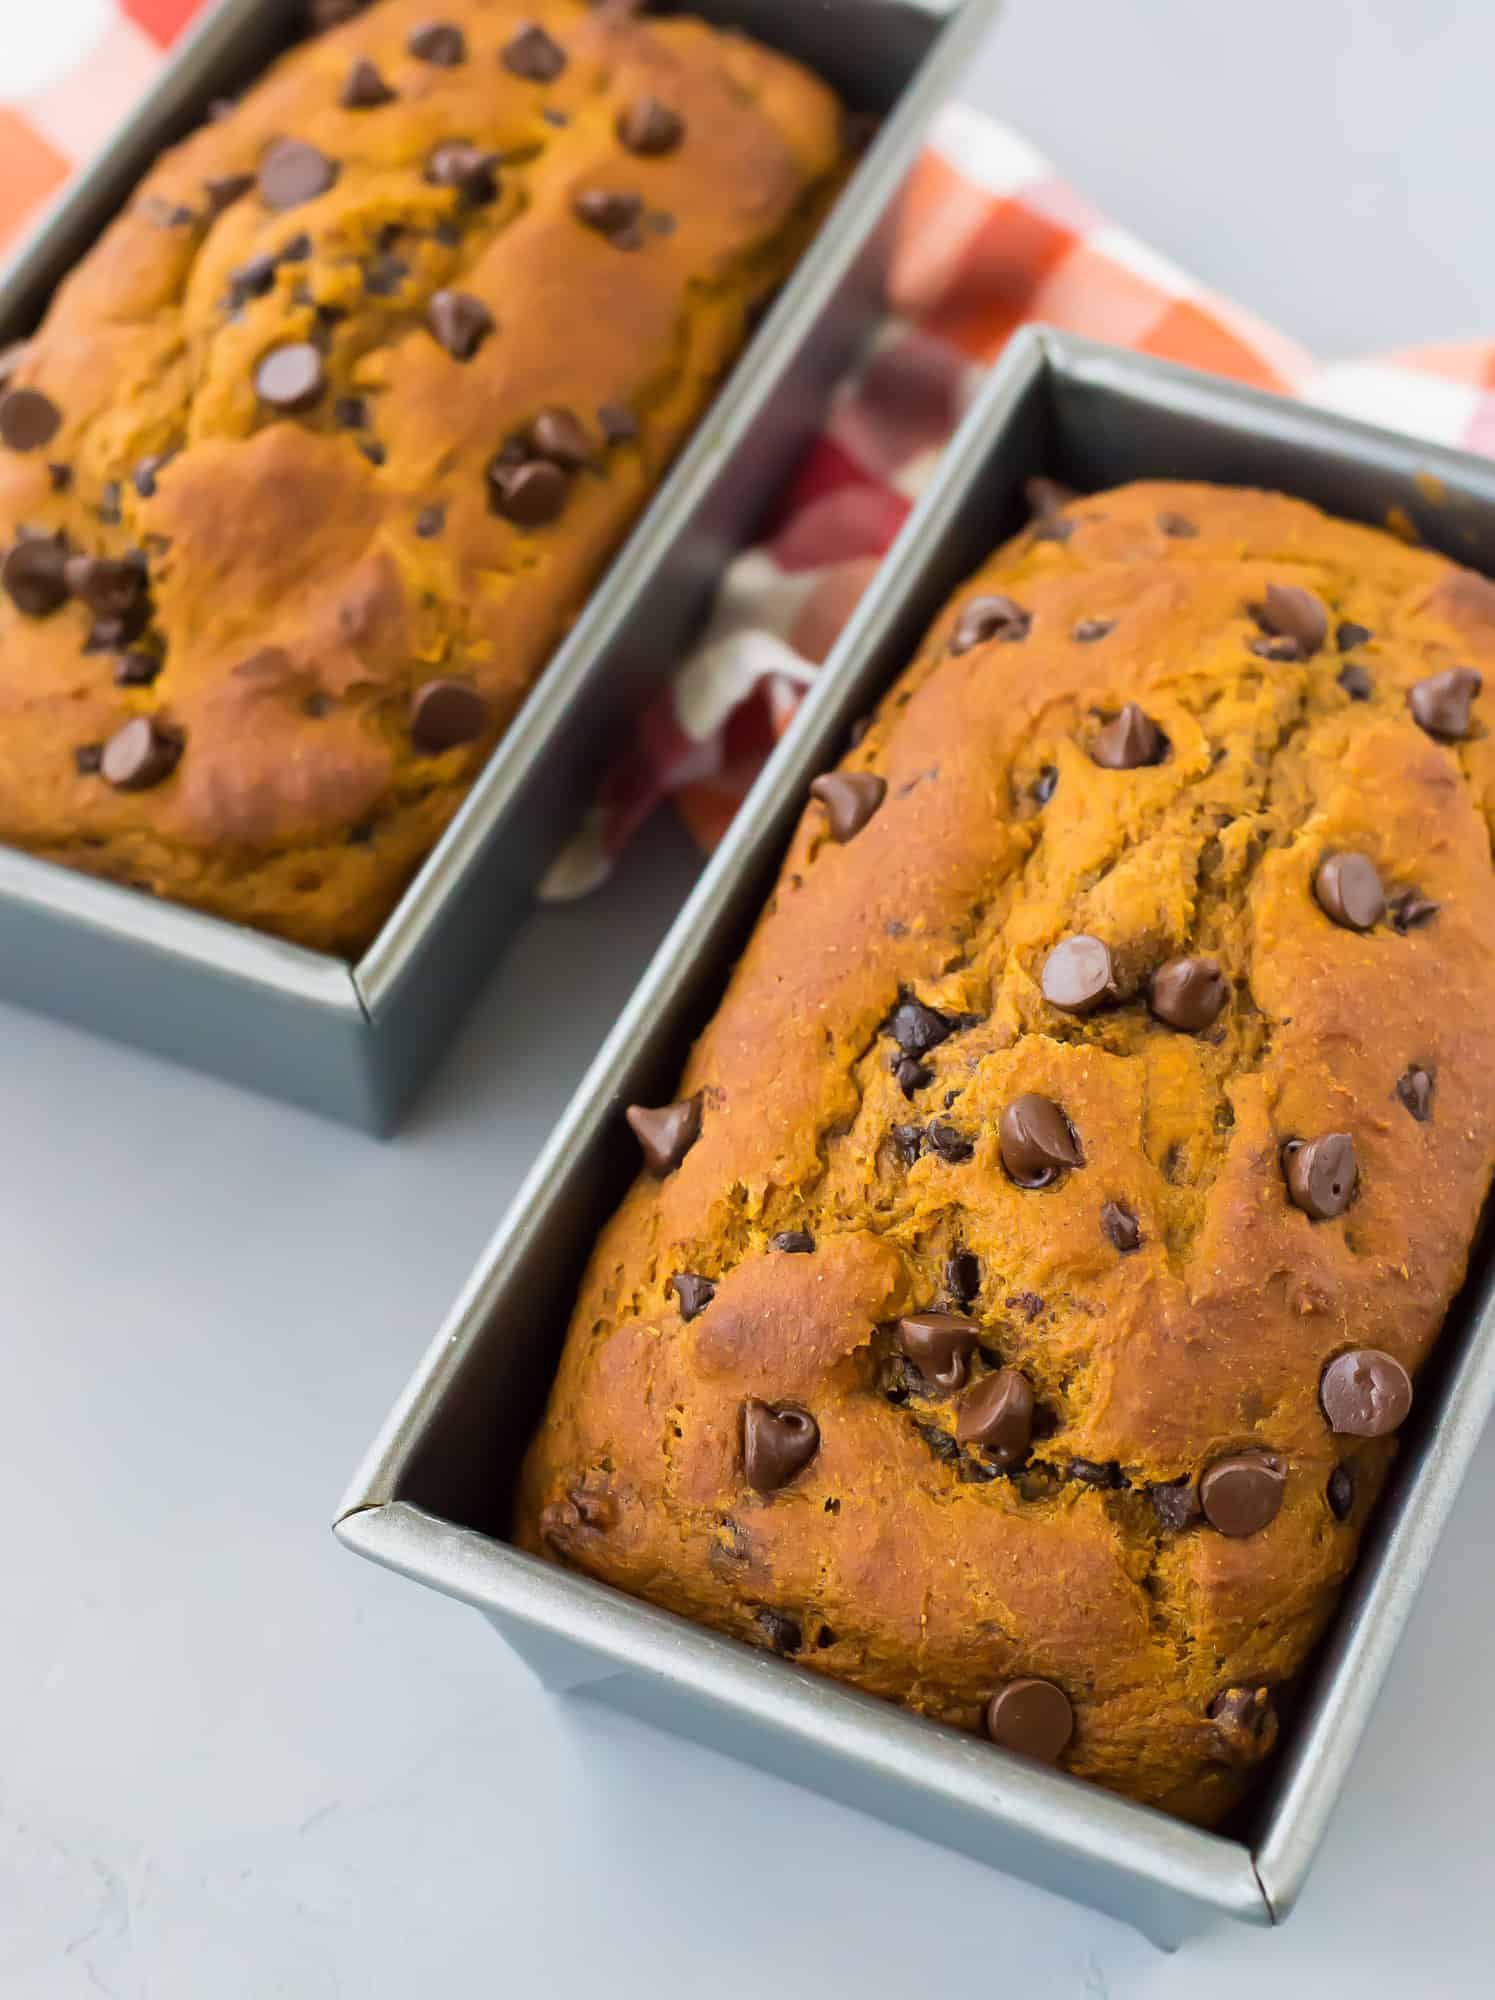 Two pumpkin chocolate chip bread loaves in loaf pans.